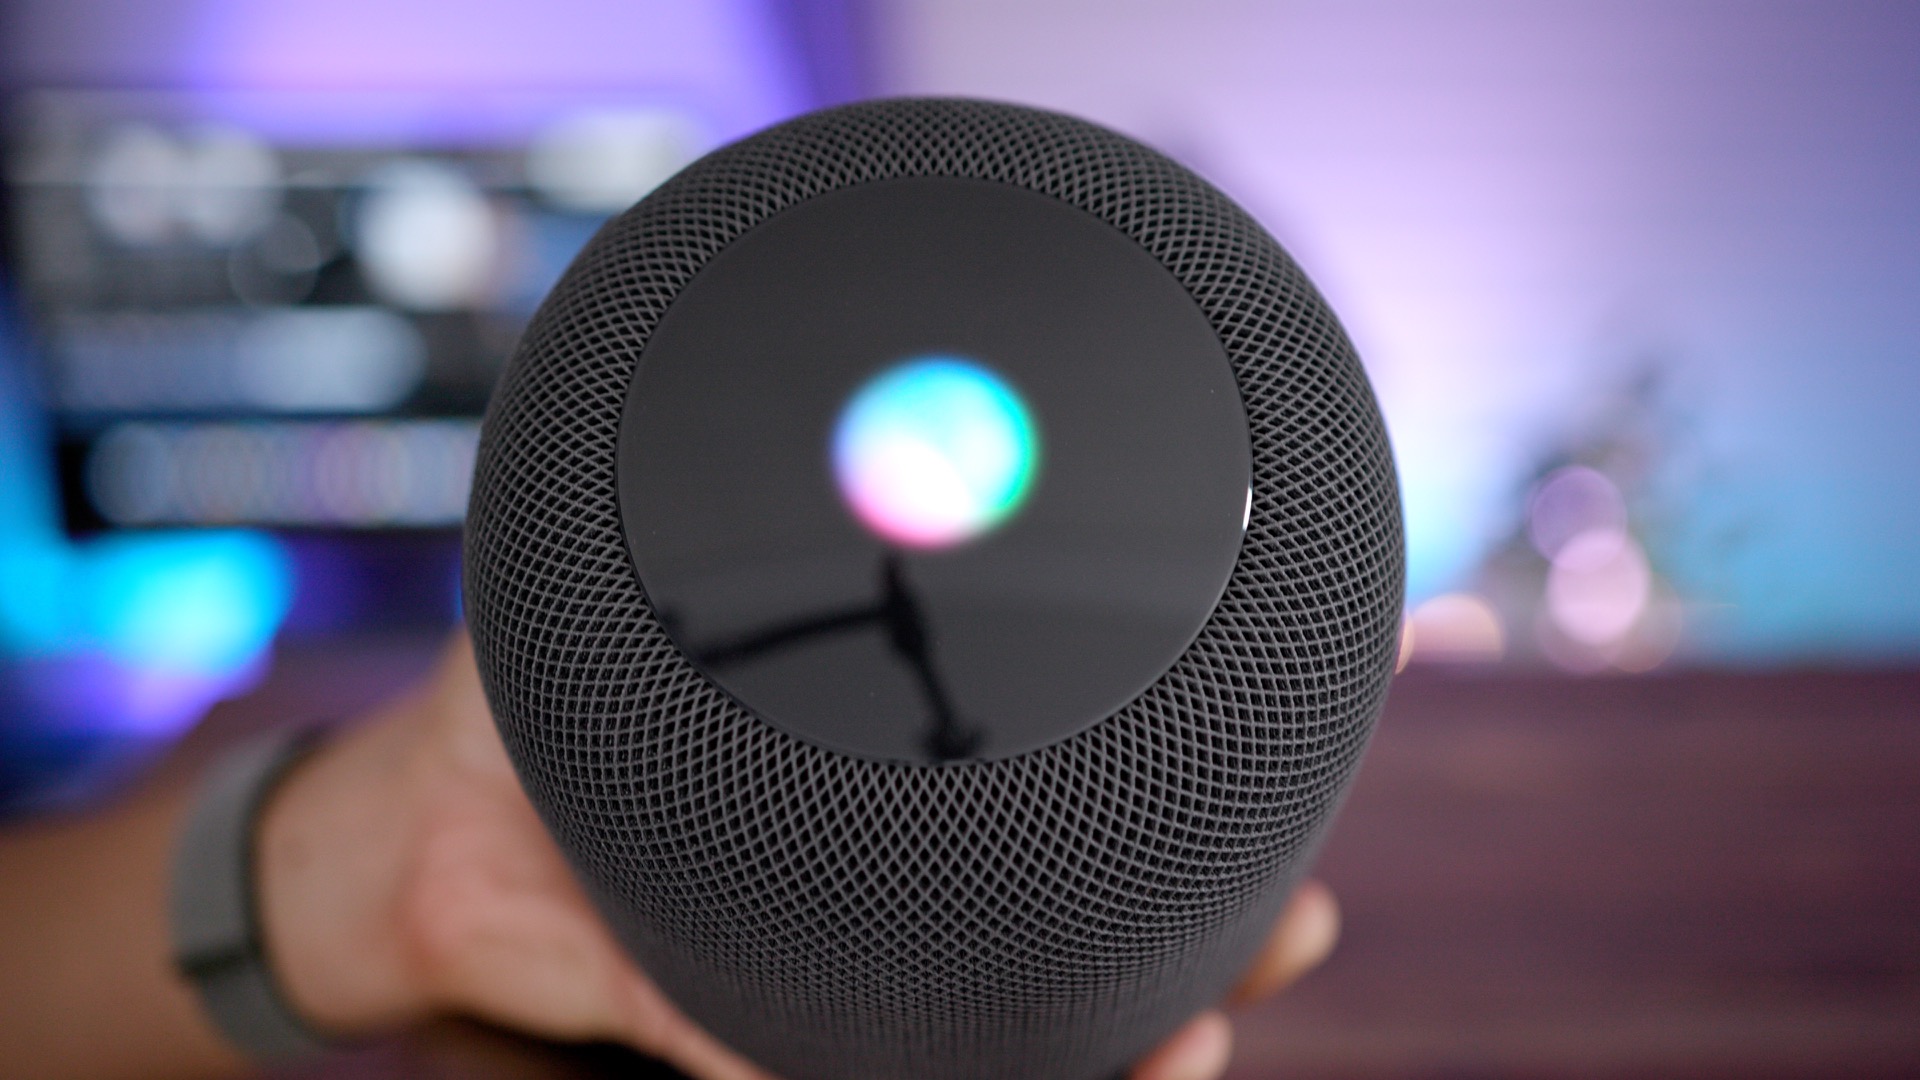 google assistant on homepod